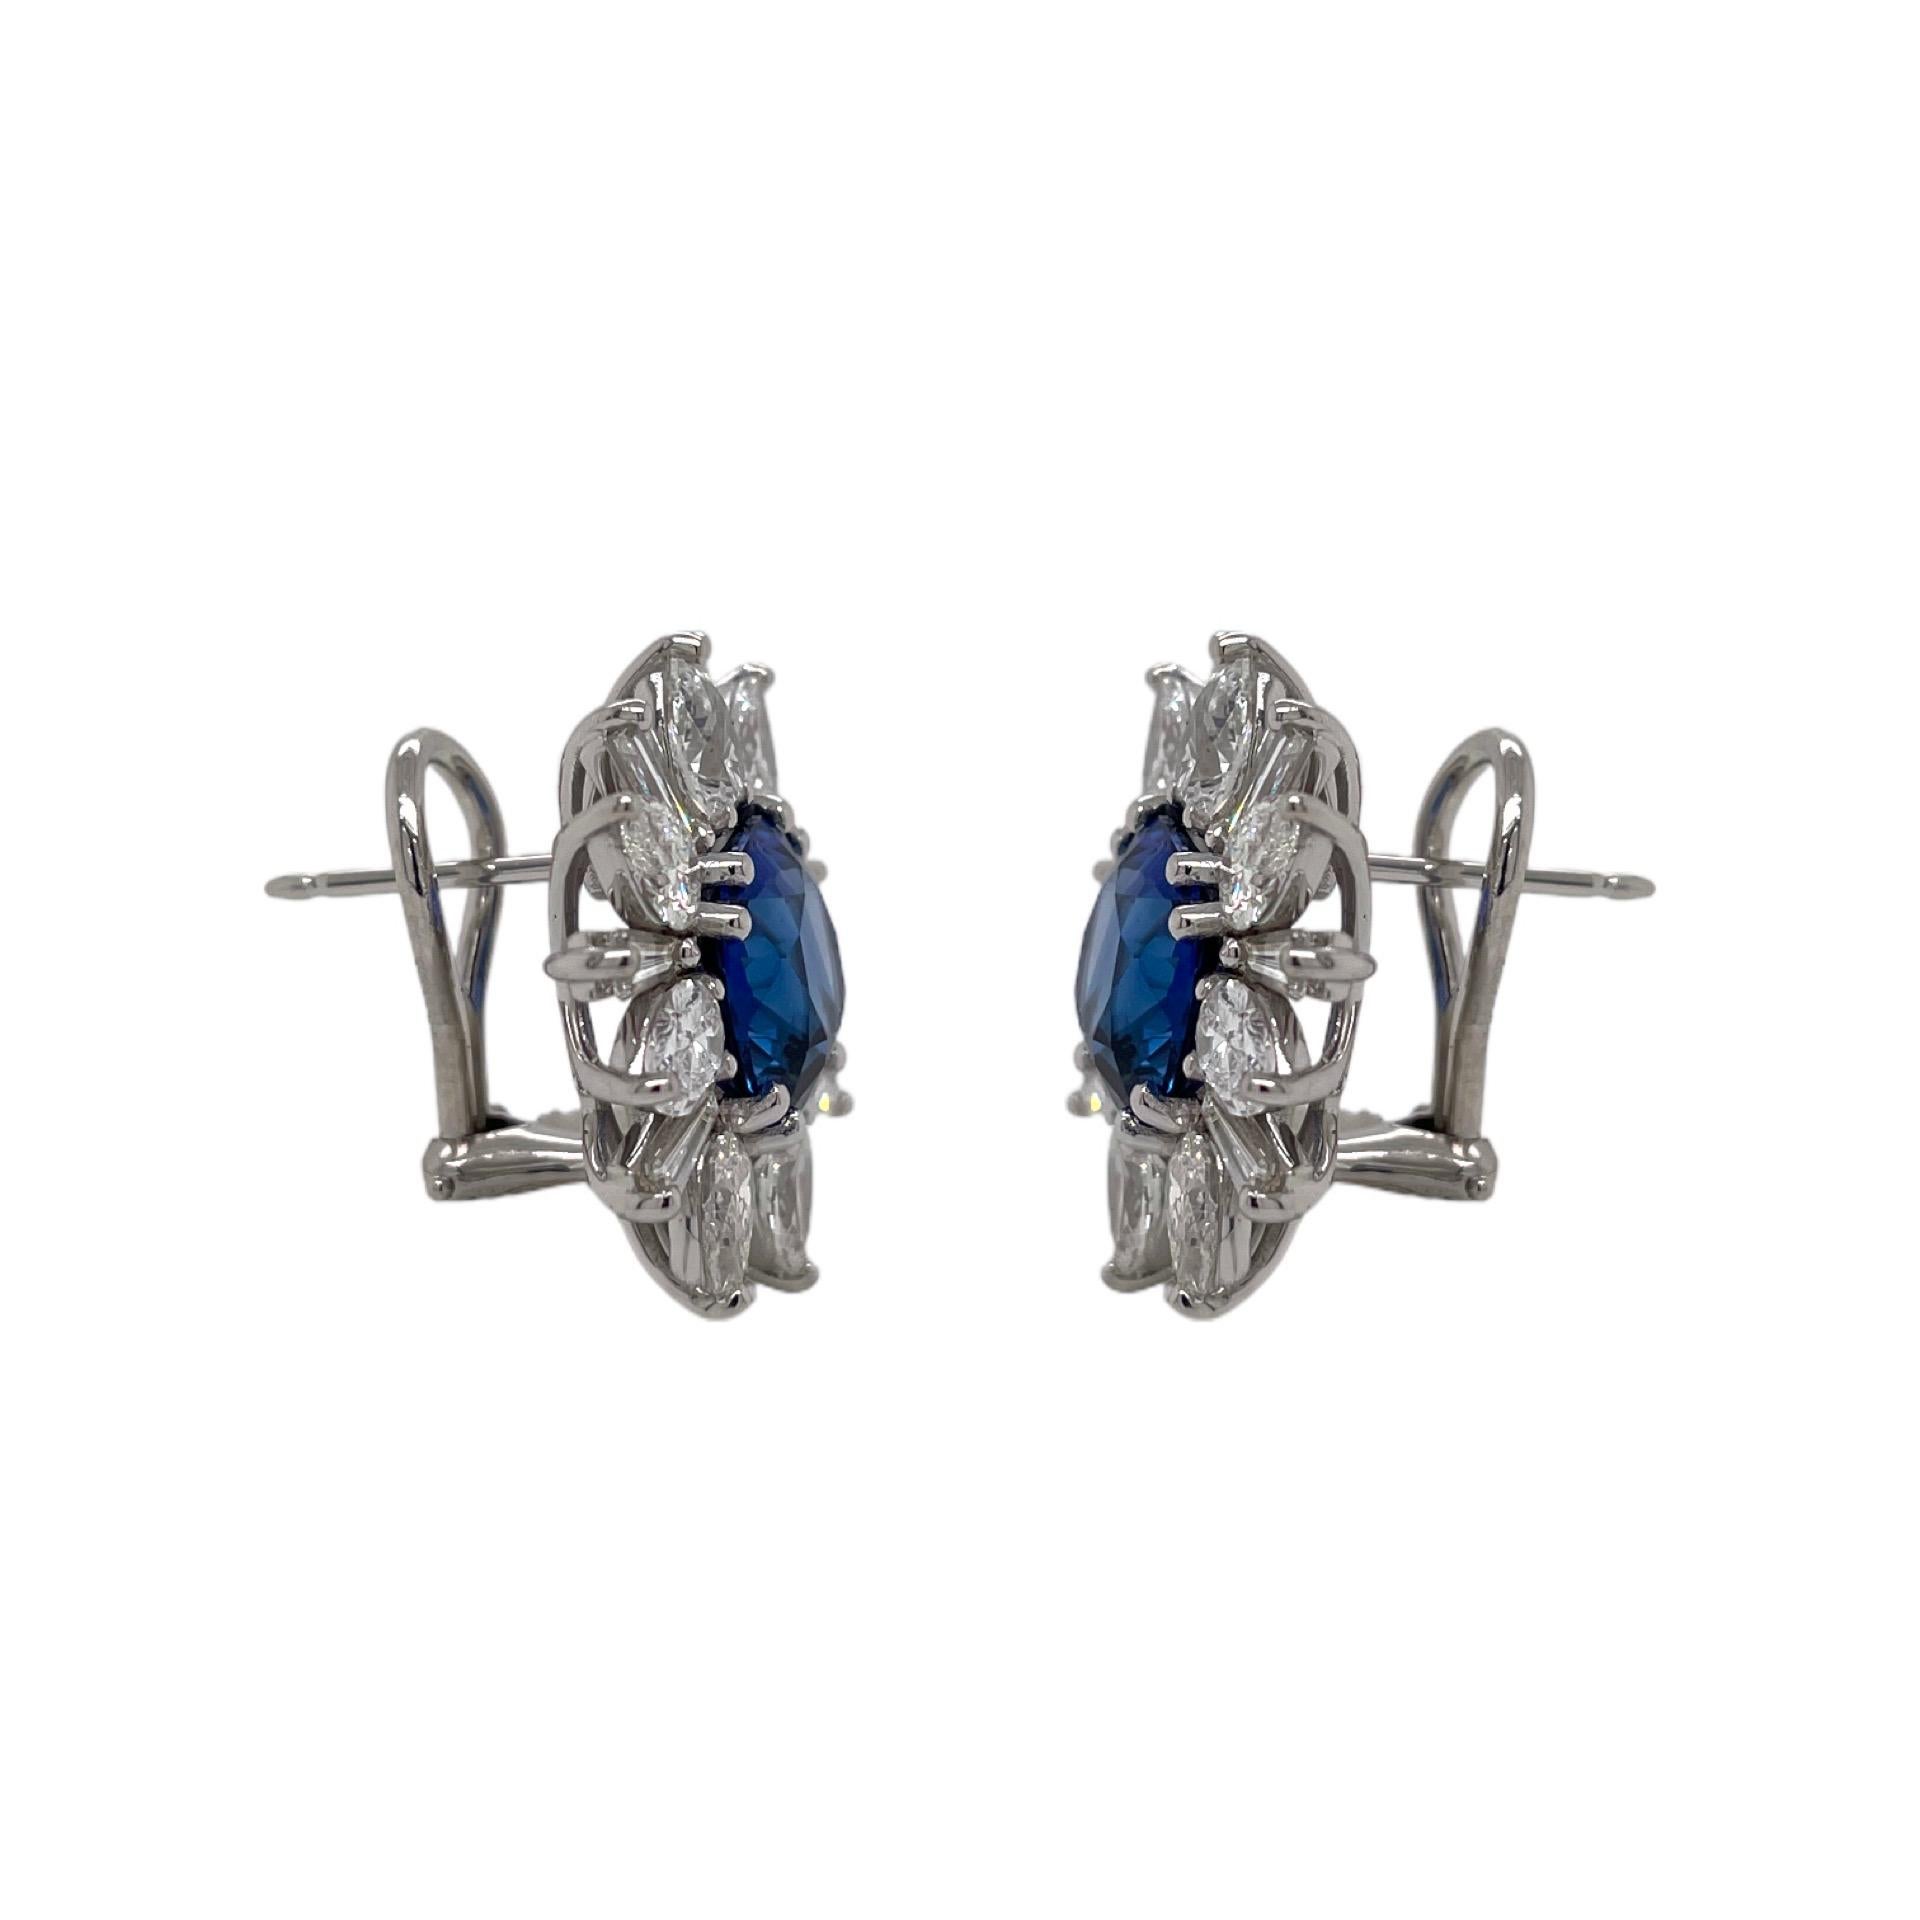 Earrings contain 2 finely matched sapphires 7.10tcw, 16 pear shape diamonds 4.16tcw and 16 baguette diamonds, 1.35tcw. Diamonds are colorless and VS2 in clarity, excellent cut. All stones are mounted in a handmade 18K prong setting with a French